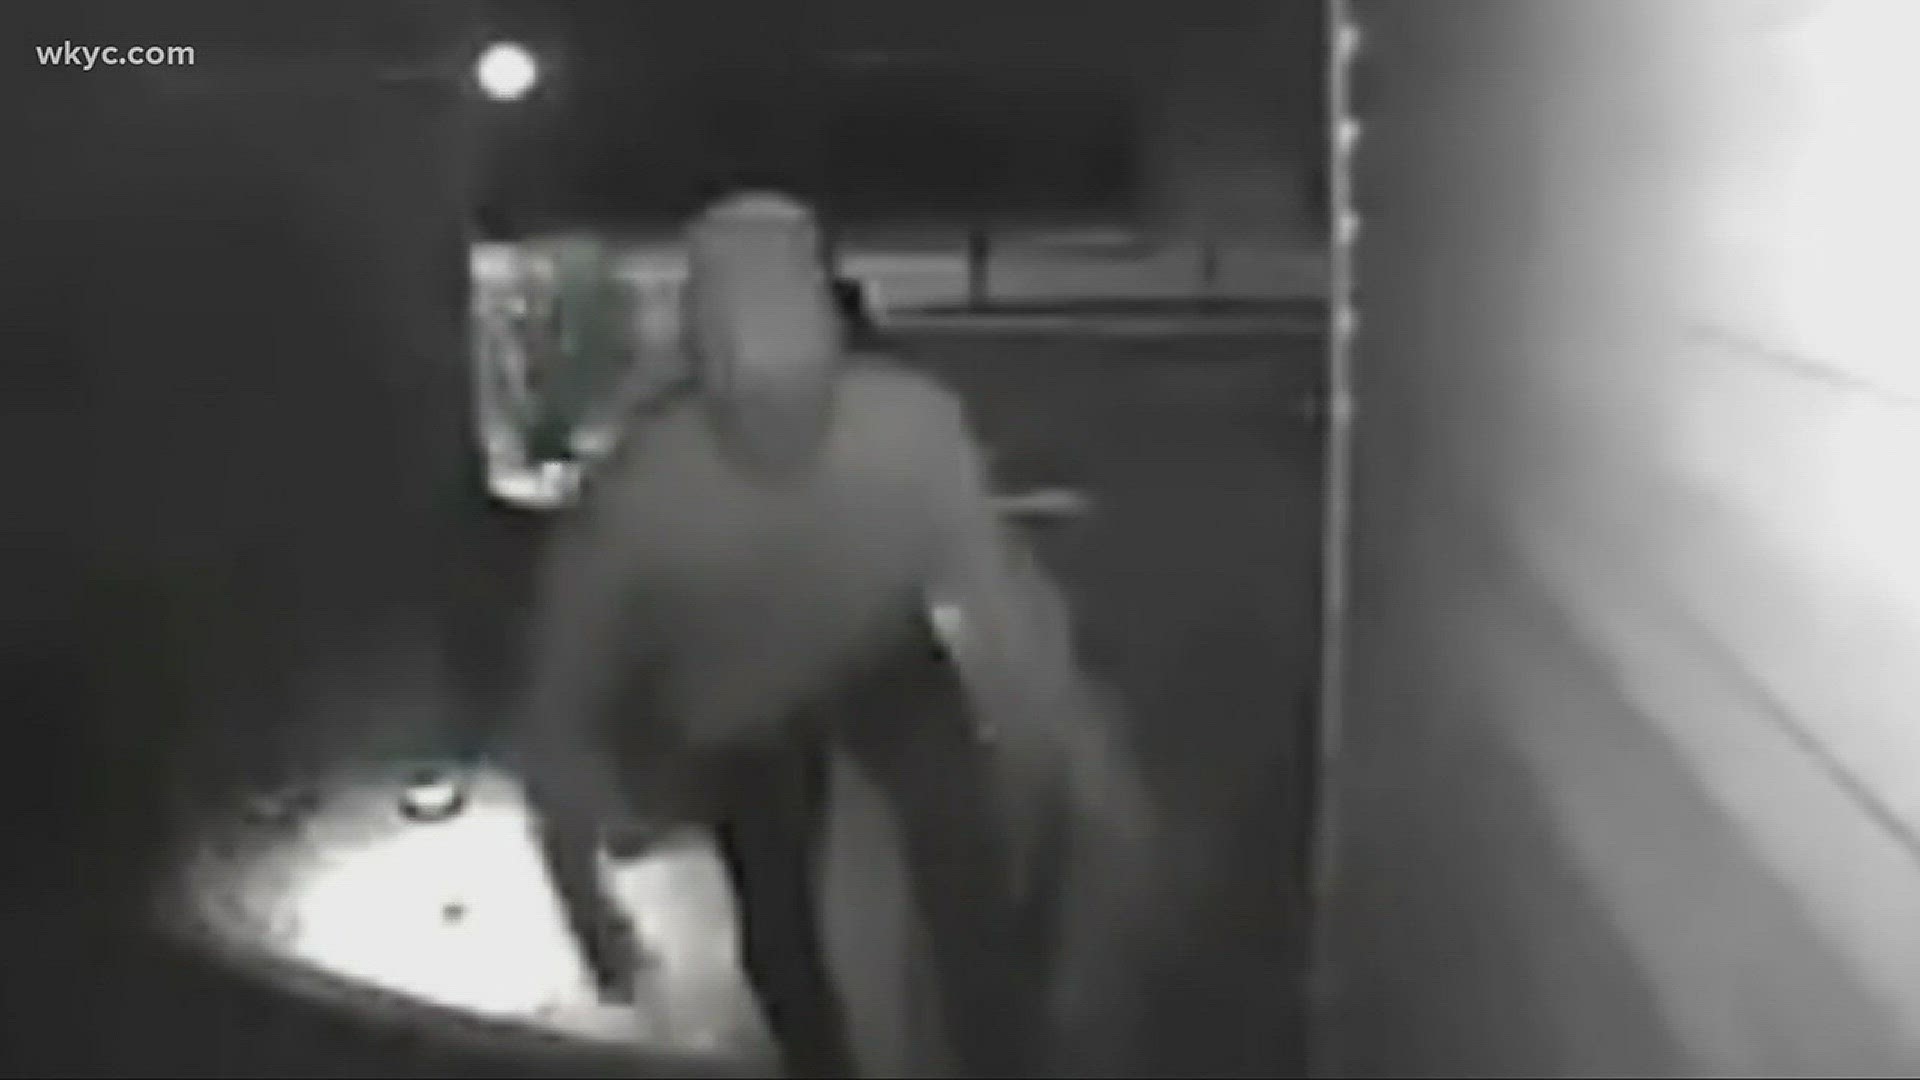 Surveillance video from Geauga county shows two men allegedly stealing holiday decorations